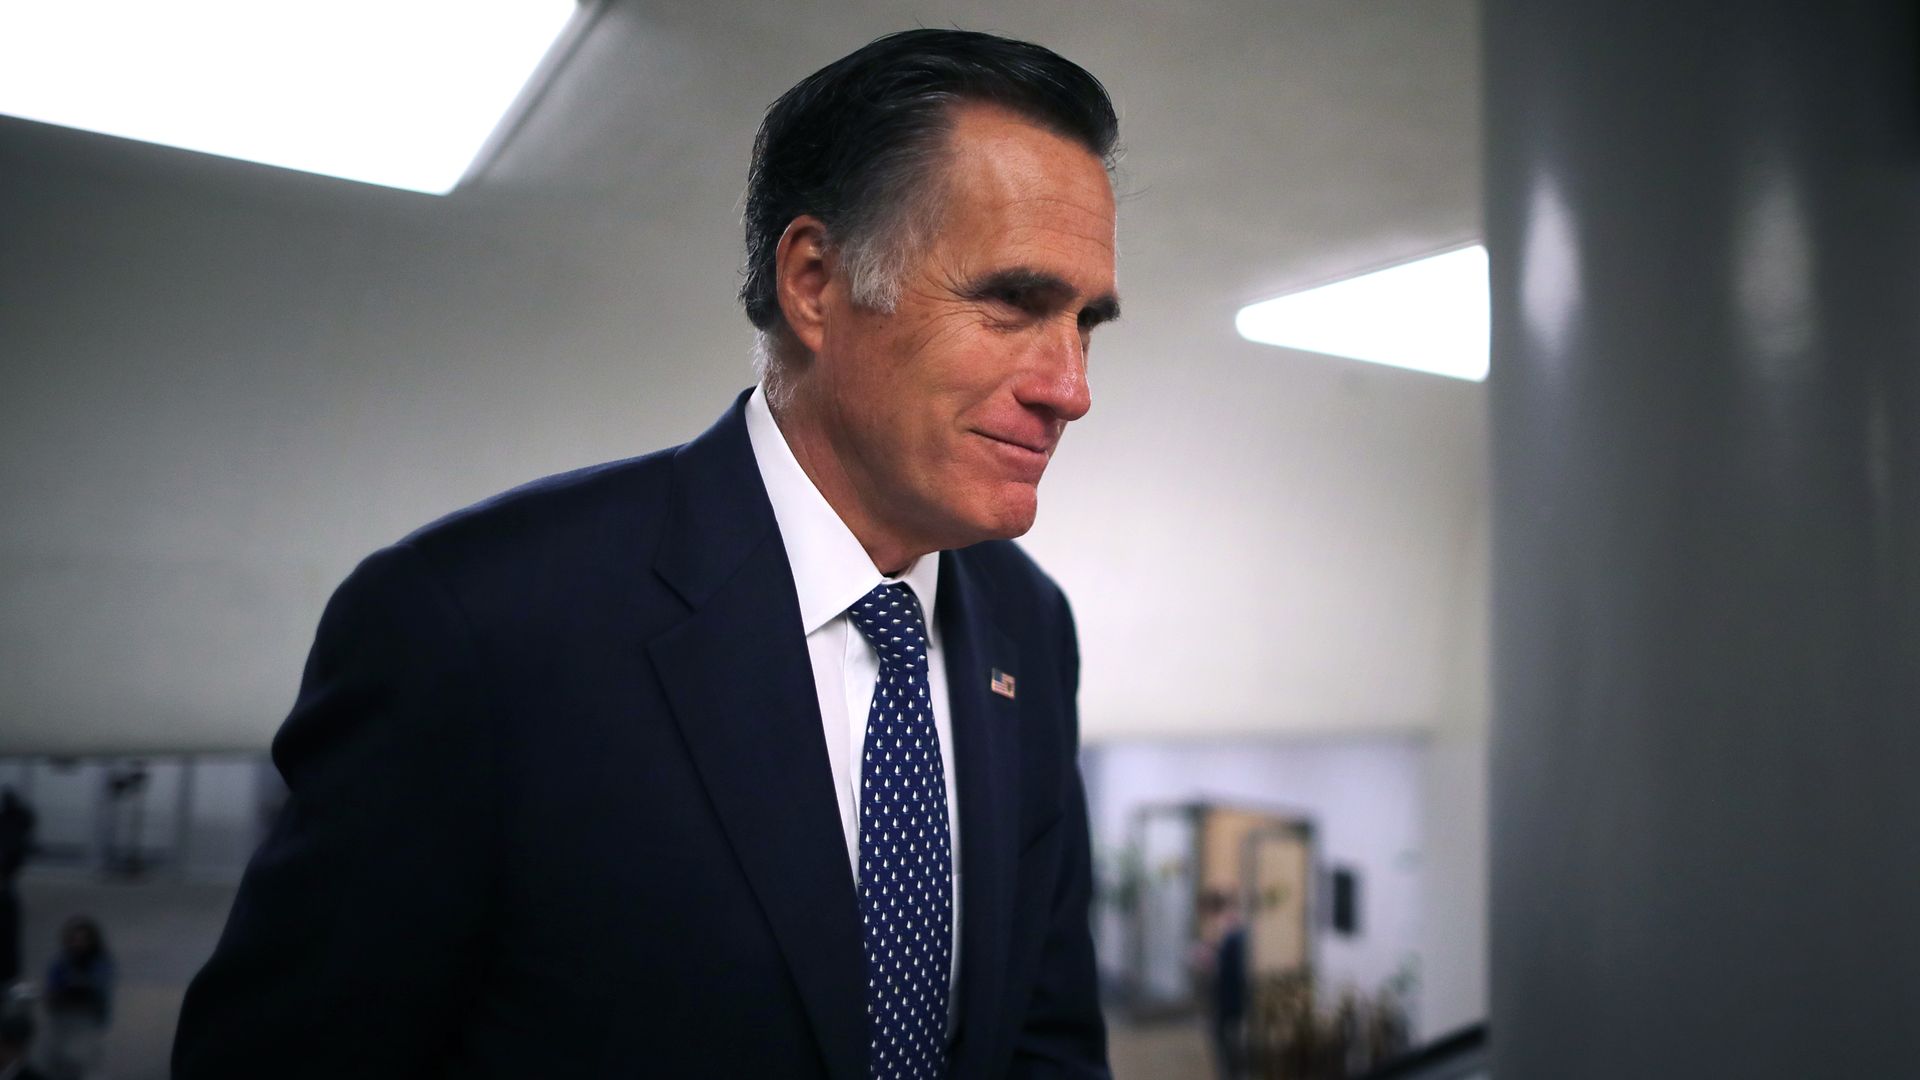 In this image, Romney walks through a hallway wearing a suit 